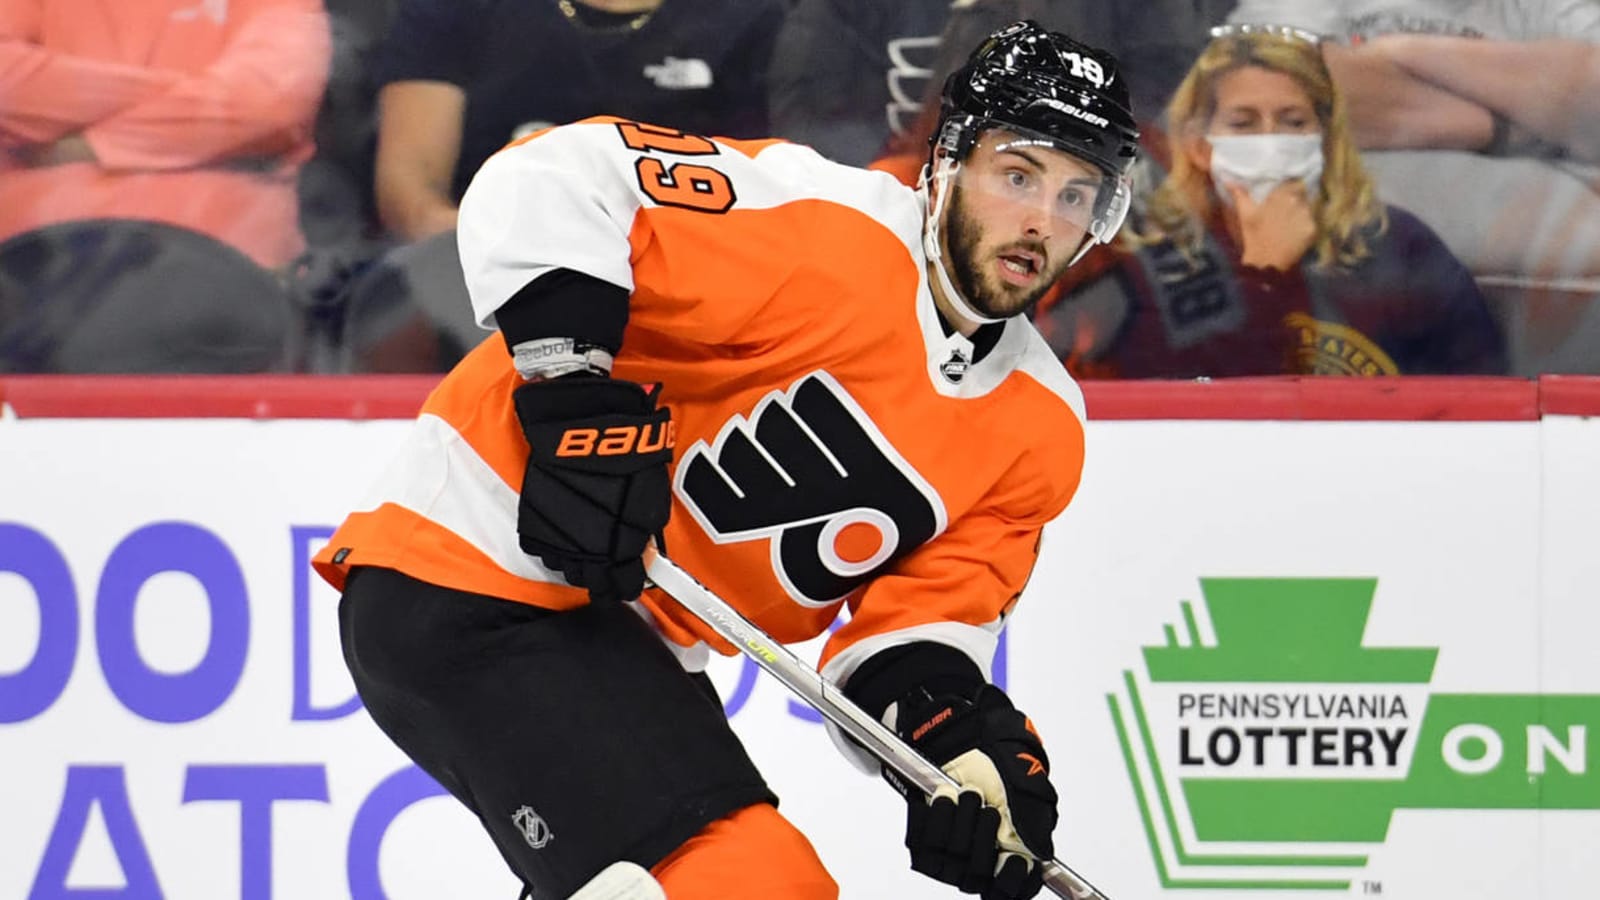 Flyers' Brassard fined $2K for punching Capitals' Hathaway